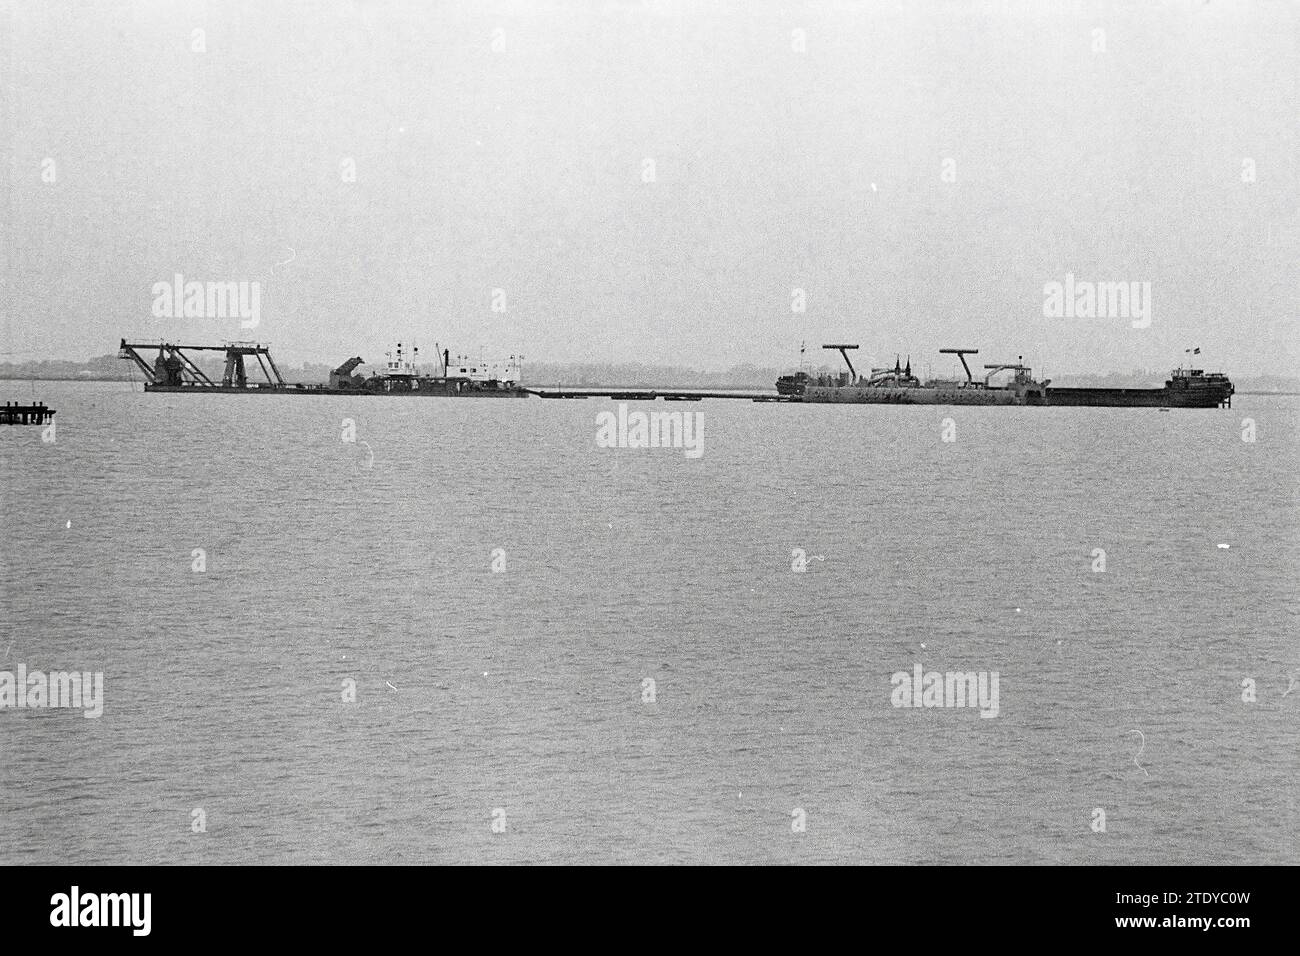 Sand dredgers in Alkmaardermeer, Sand, 09-05-1974, Whizgle News from the Past, Tailored for the Future. Explore historical narratives, Dutch The Netherlands agency image with a modern perspective, bridging the gap between yesterday's events and tomorrow's insights. A timeless journey shaping the stories that shape our future. Stock Photo